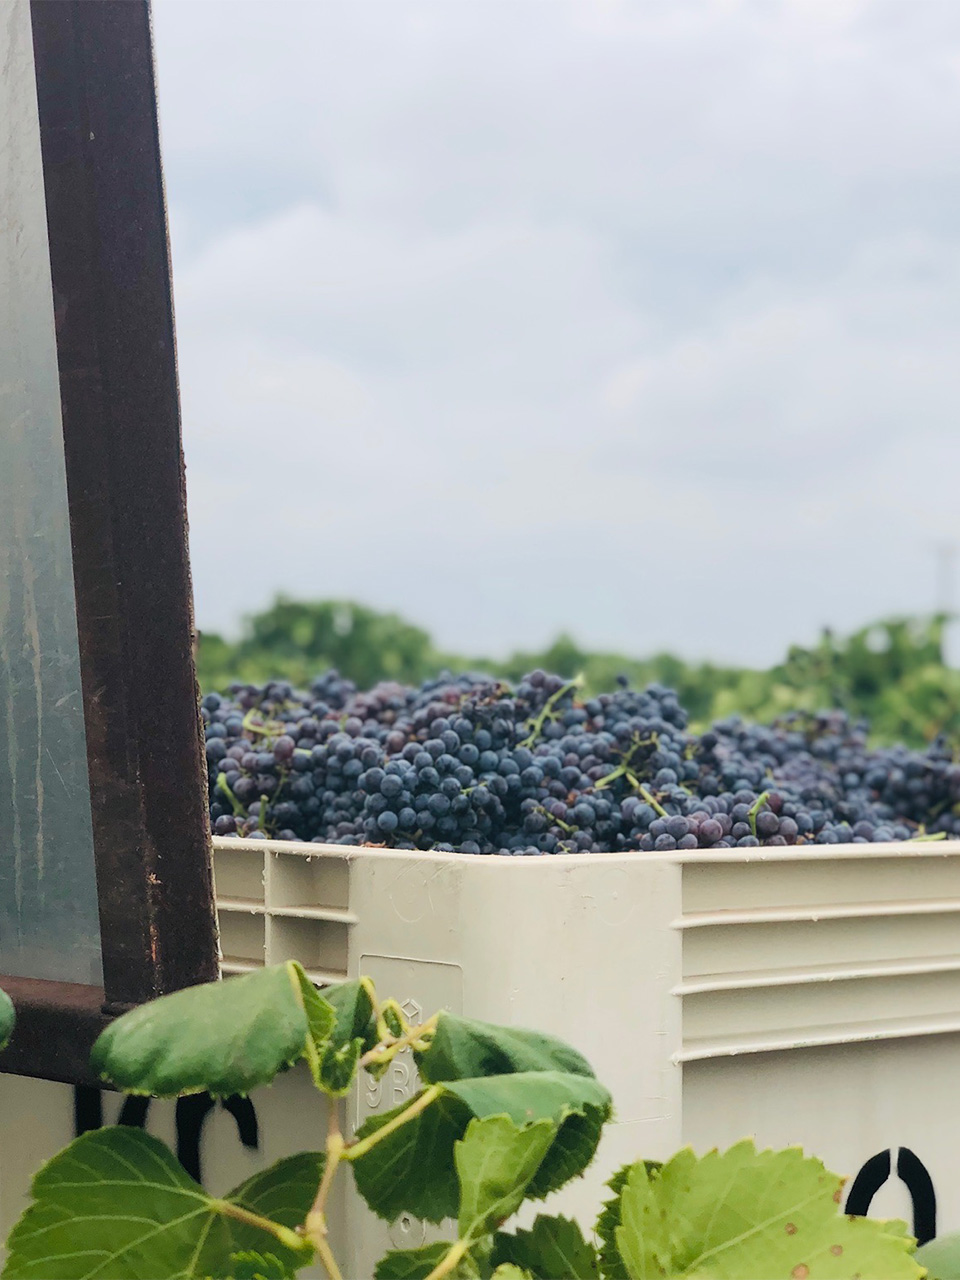 Grapes in a large harvest bin